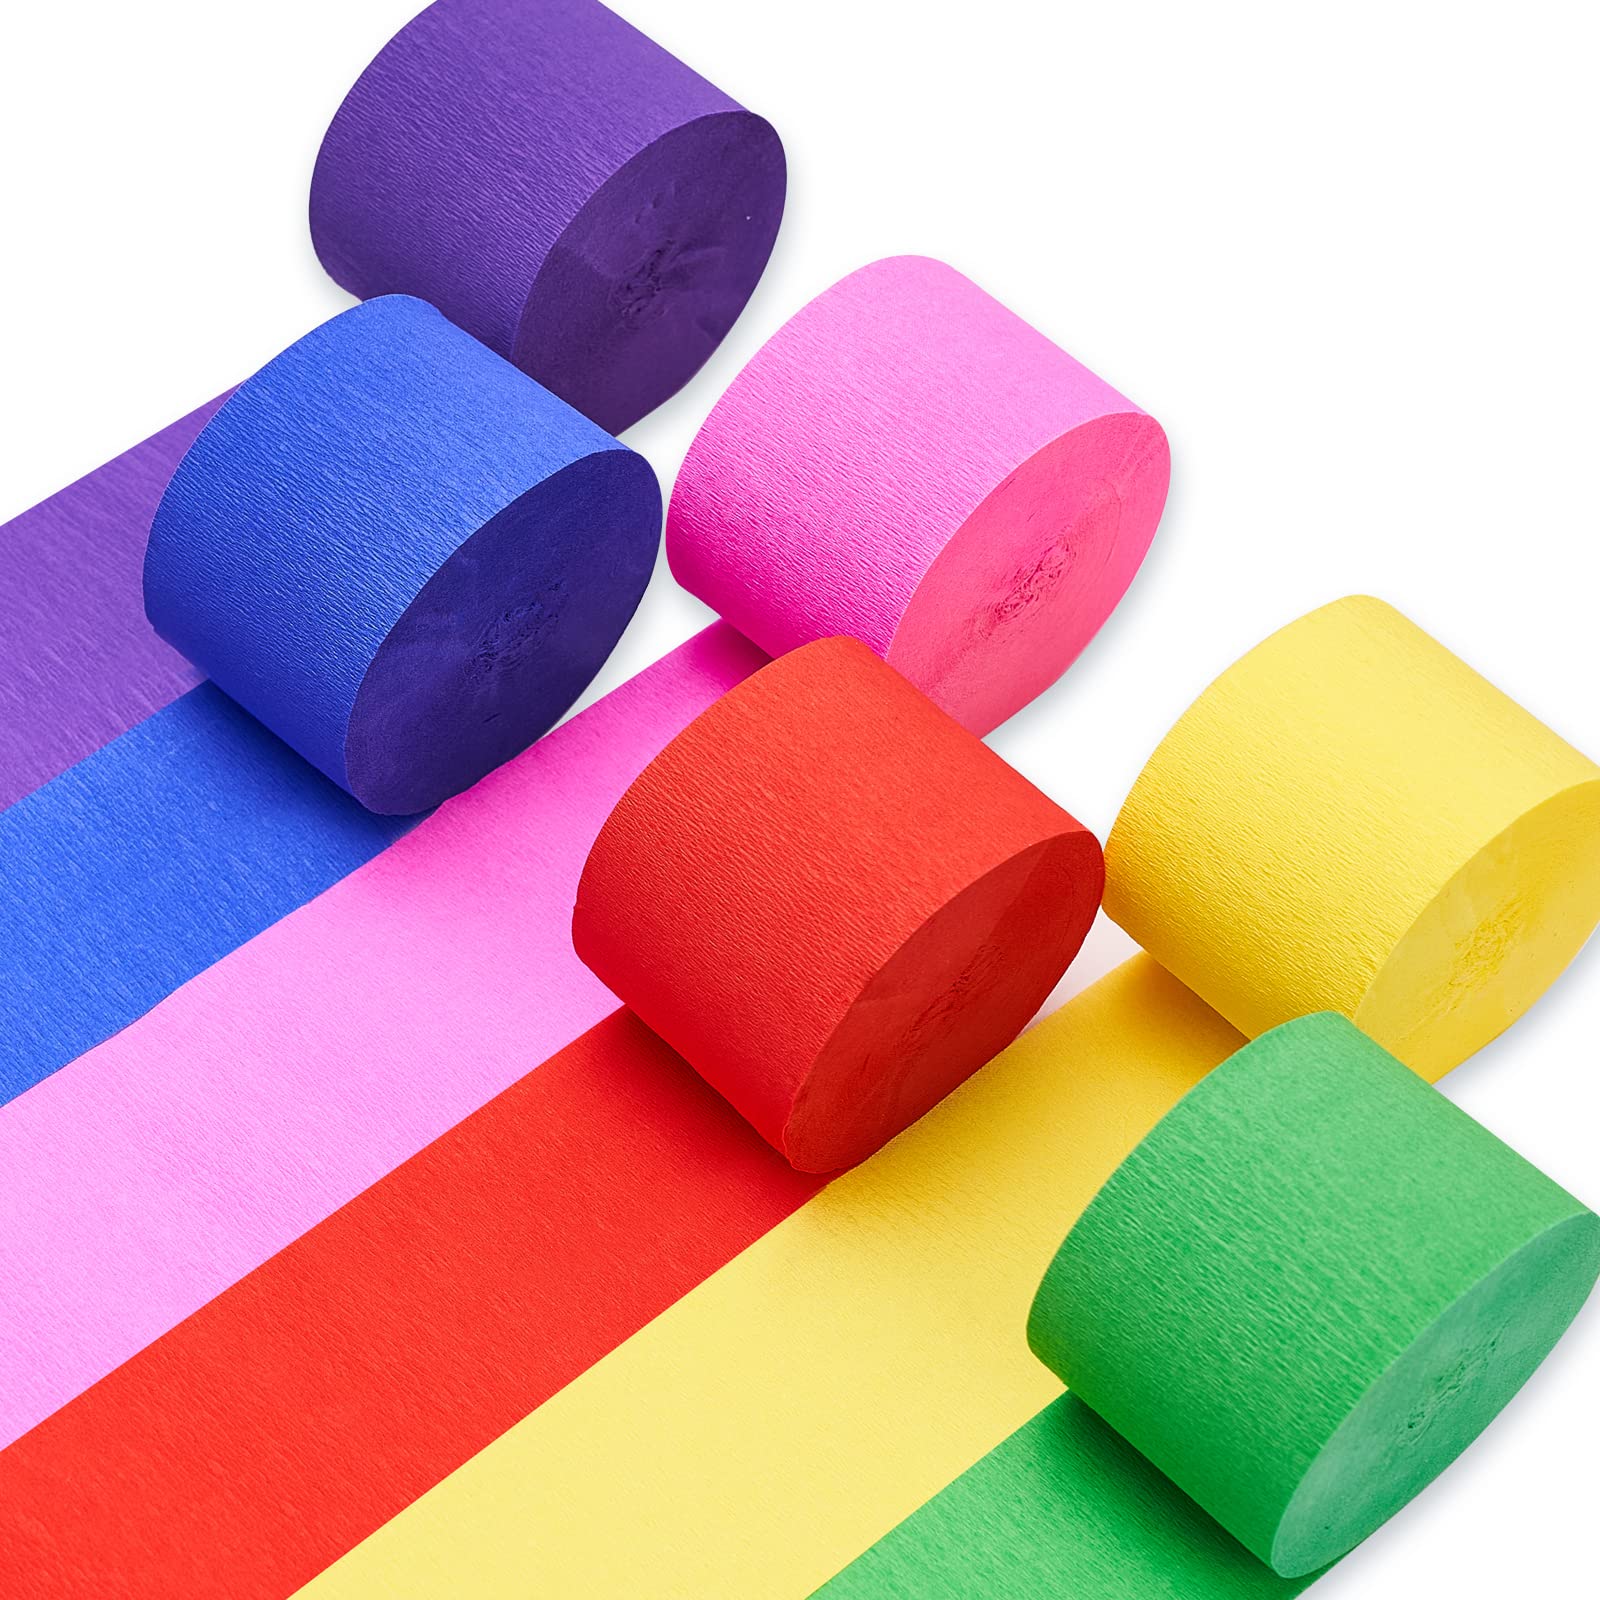 PartyWoo Crepe Paper Streamers 6 Rolls 492ft, Pack of Rainbow